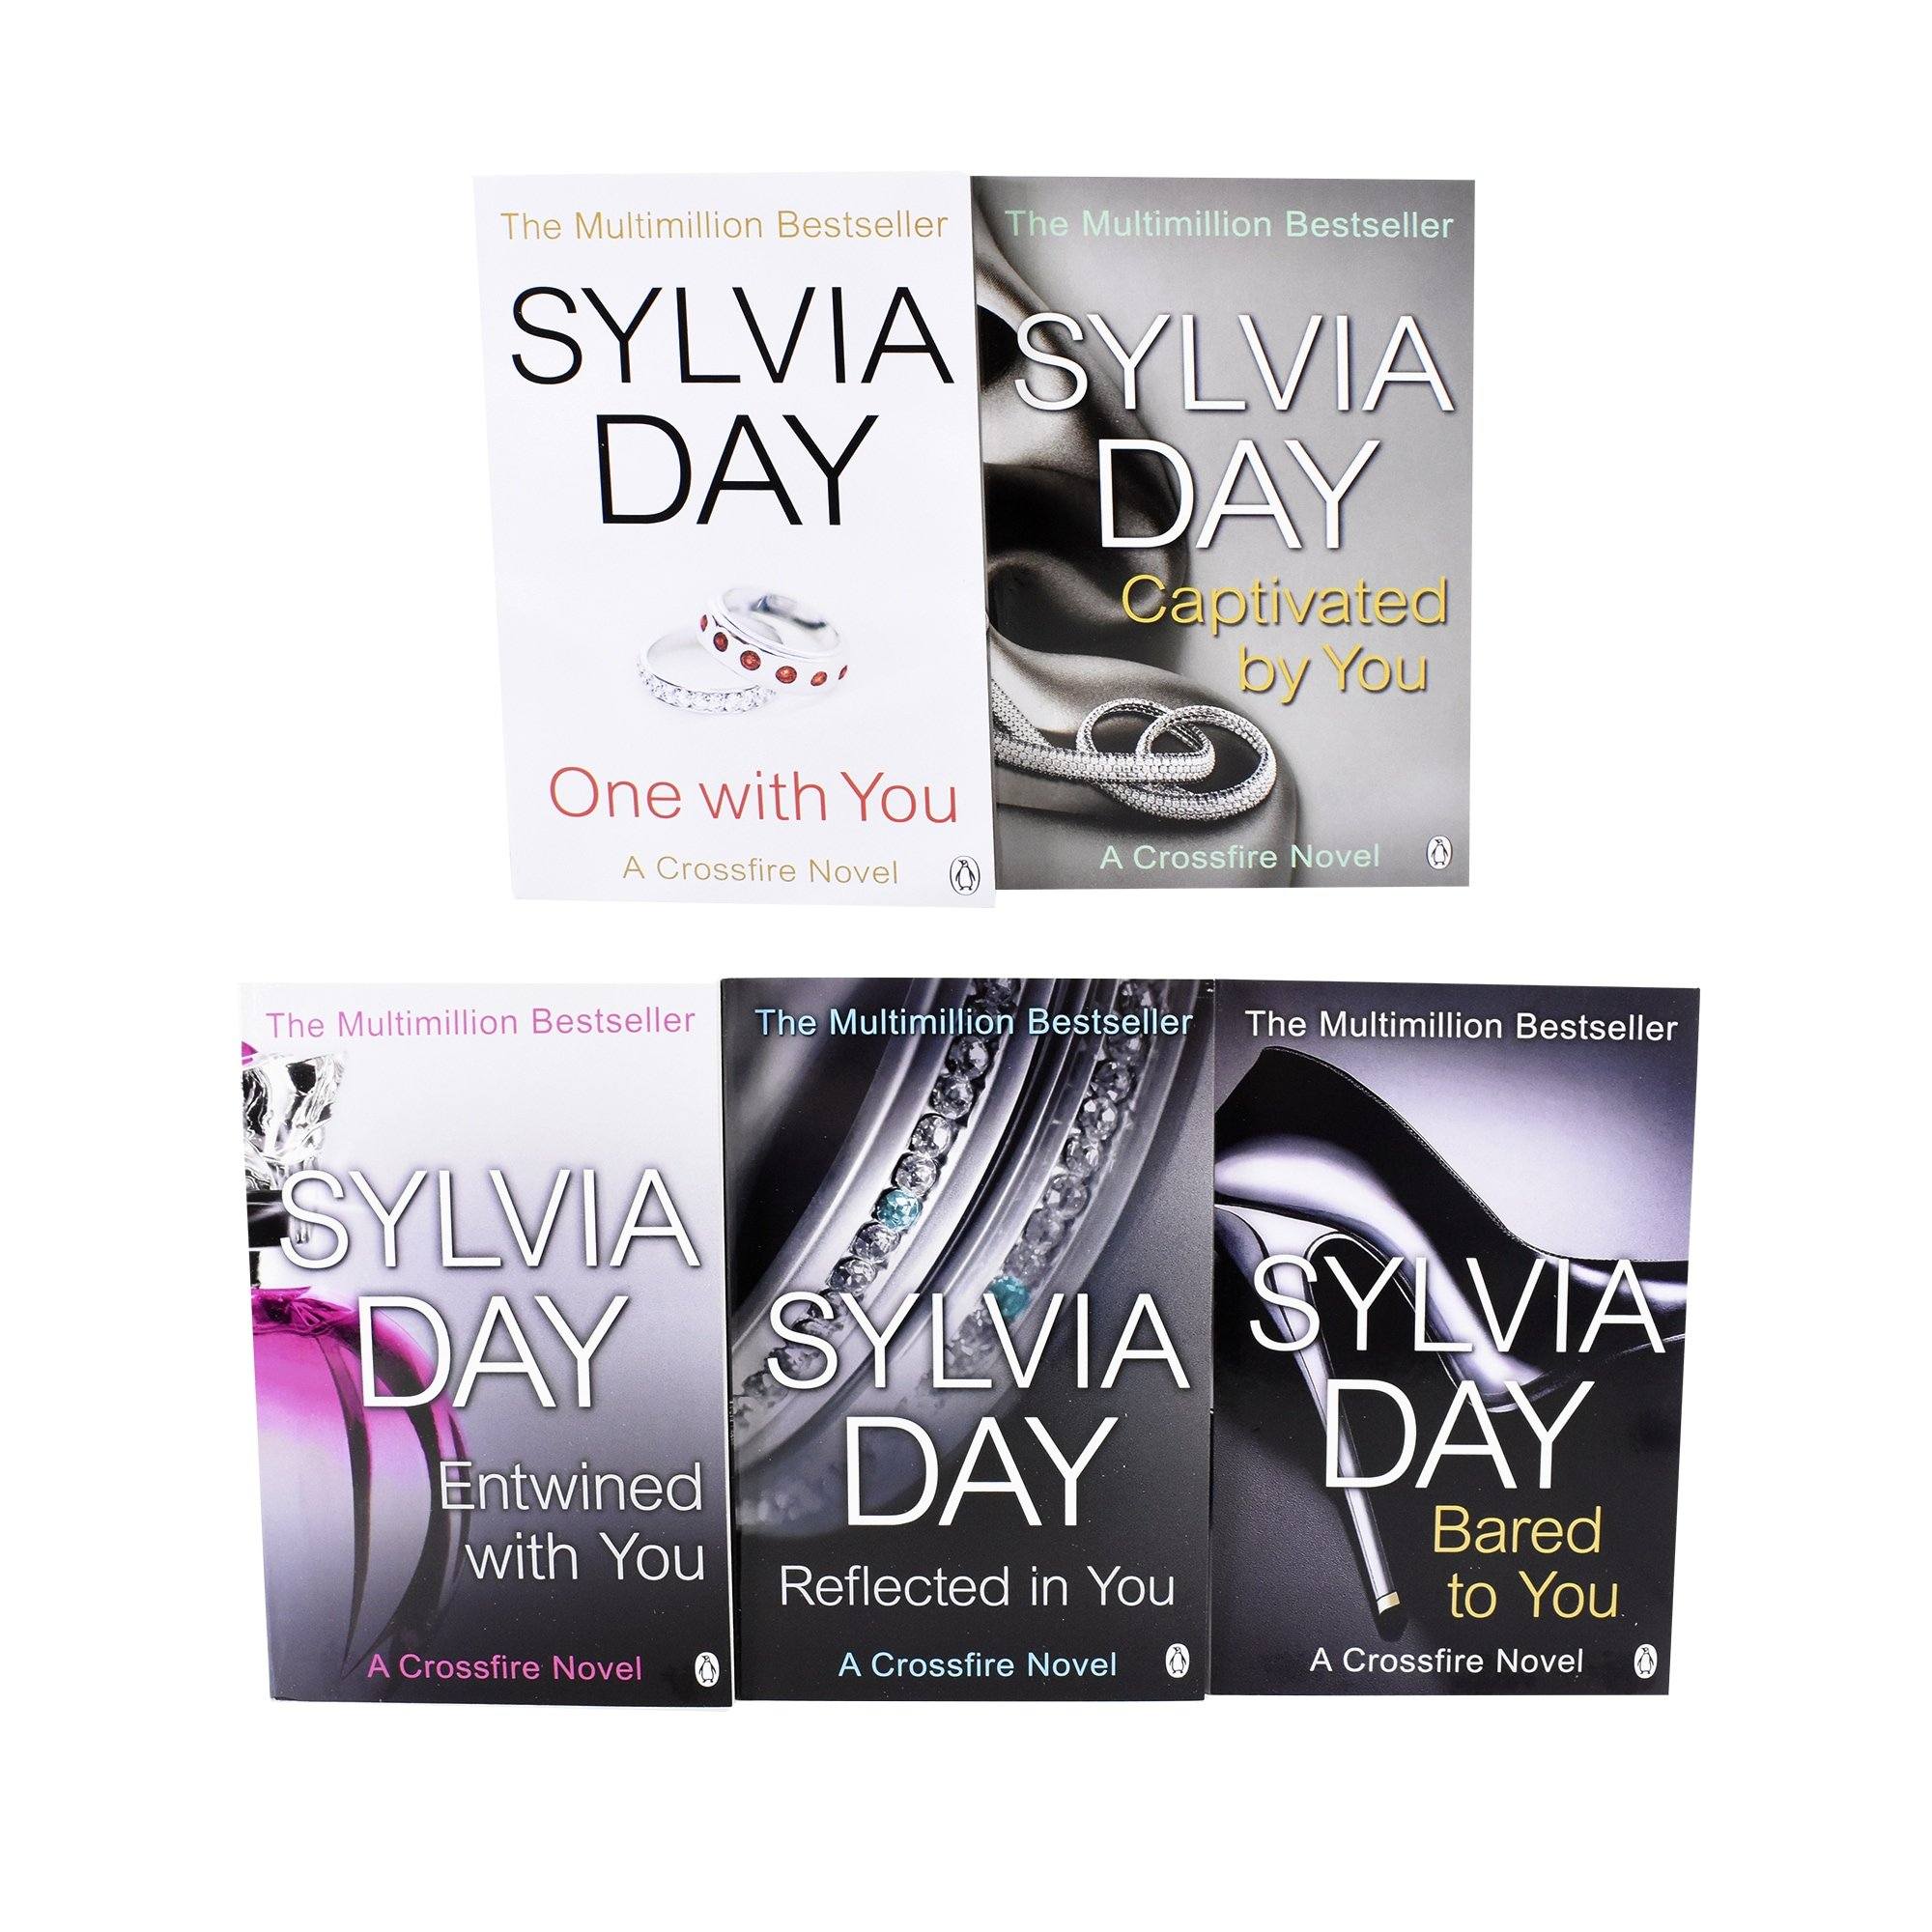 A Crossfire Novel 5 Good Fiction Books for Young Adult Collection Paperback by Sylvia Day